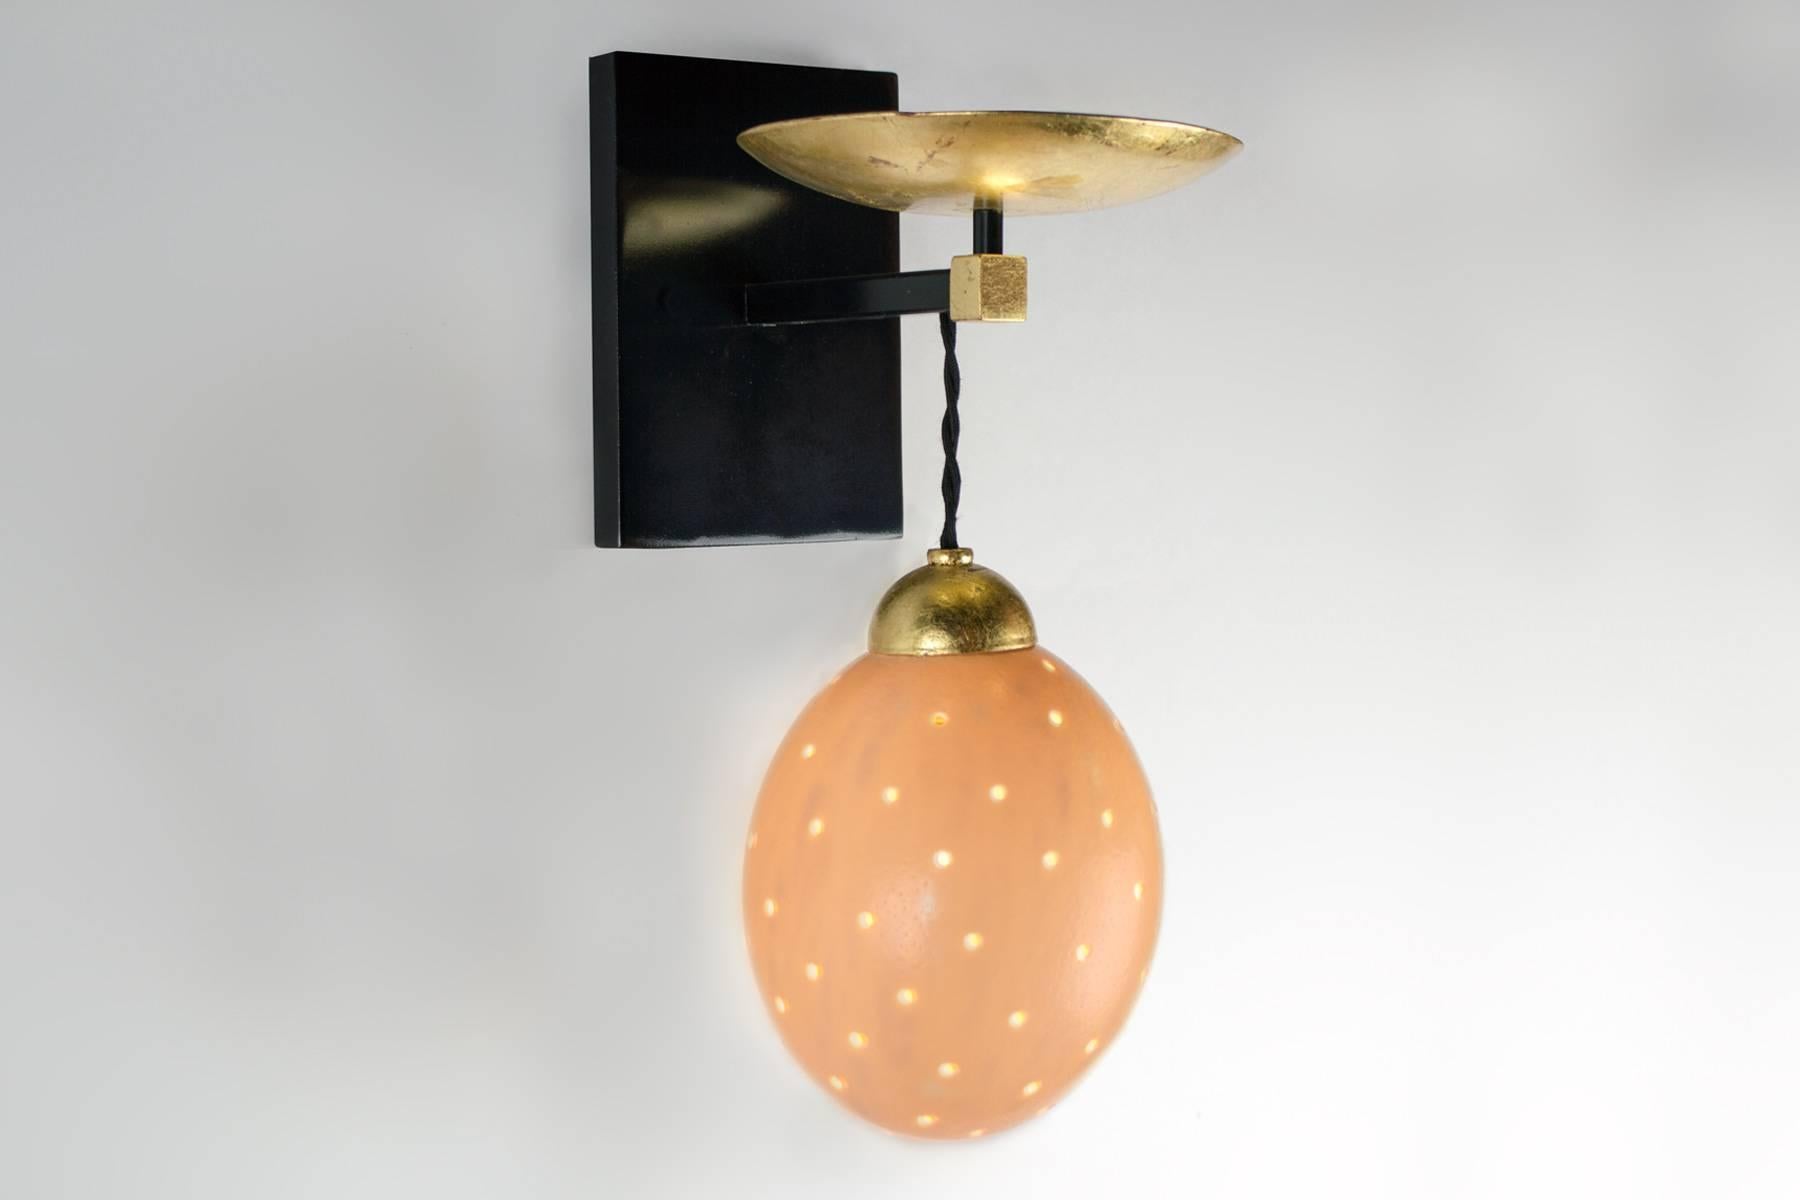 These unique lights, with a black enamel frame and gold leaf accents, have a real ostrich egg diffuser. The braided silk cord can be adjusted. Fixture uses one candelabra based socket, (25 watt max egg diffuser).